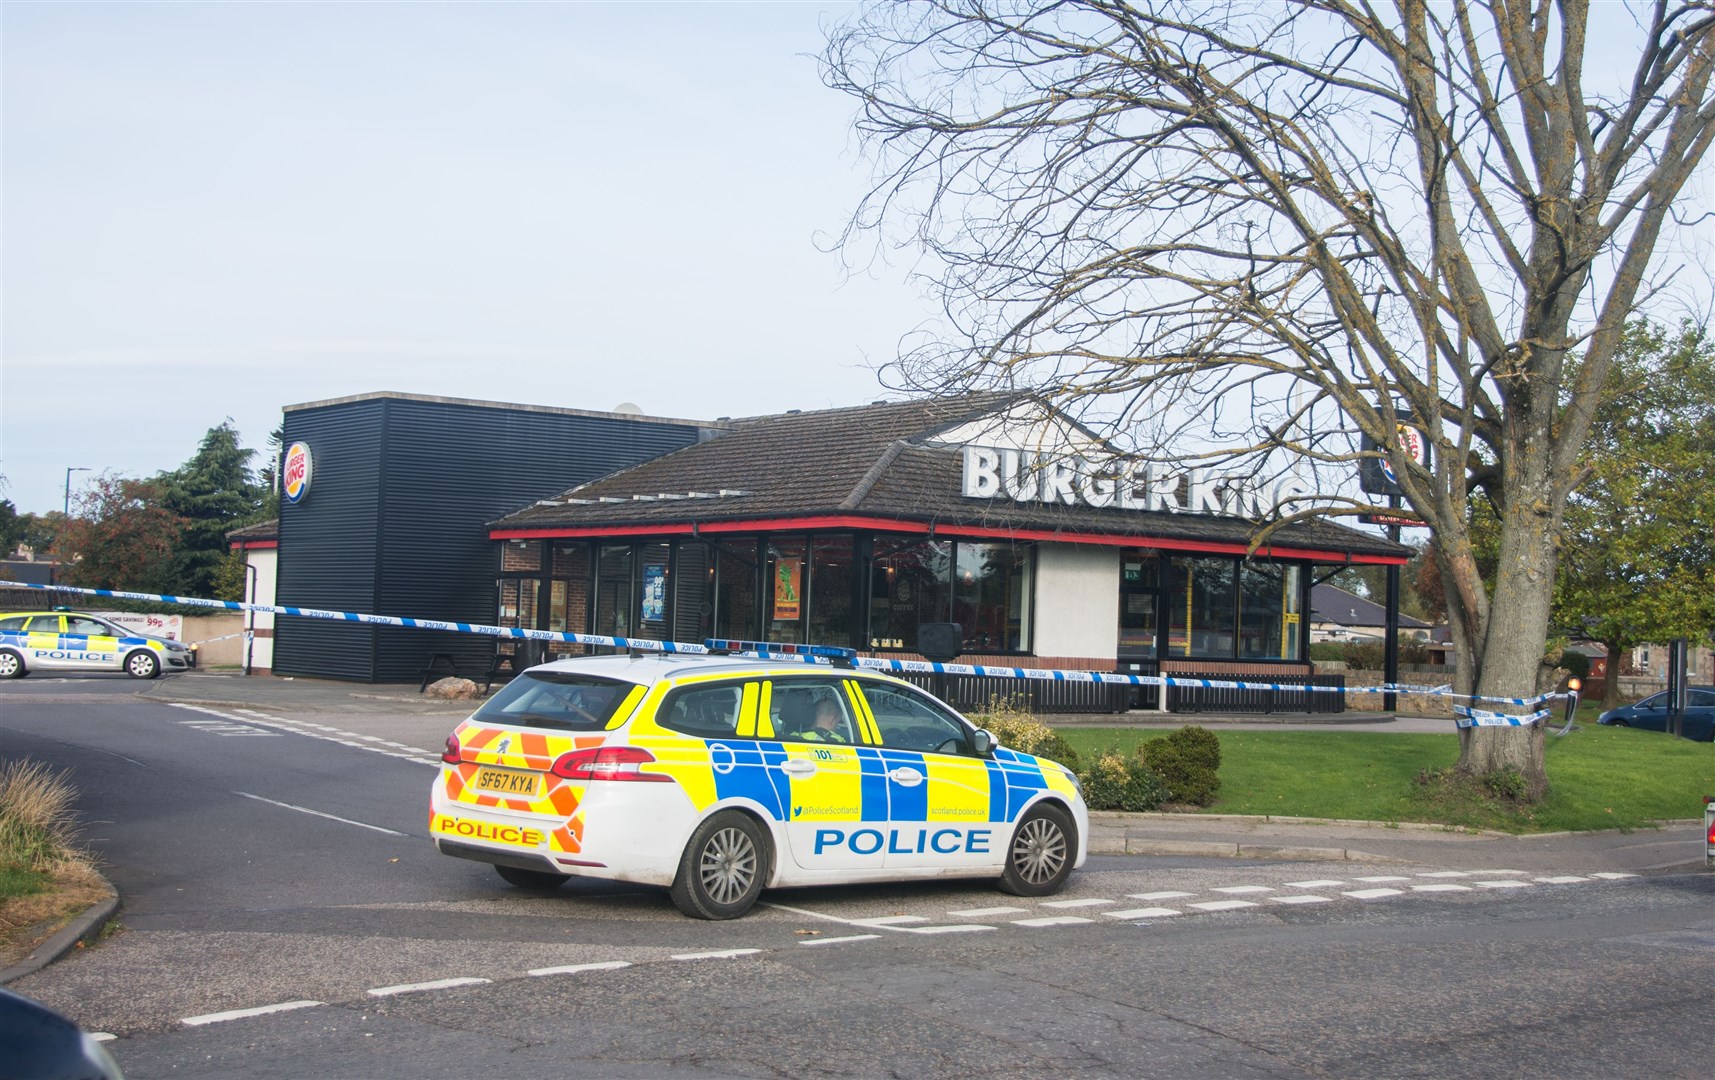 Burger King was robbed by Mr Lawson and a partner on October 13.